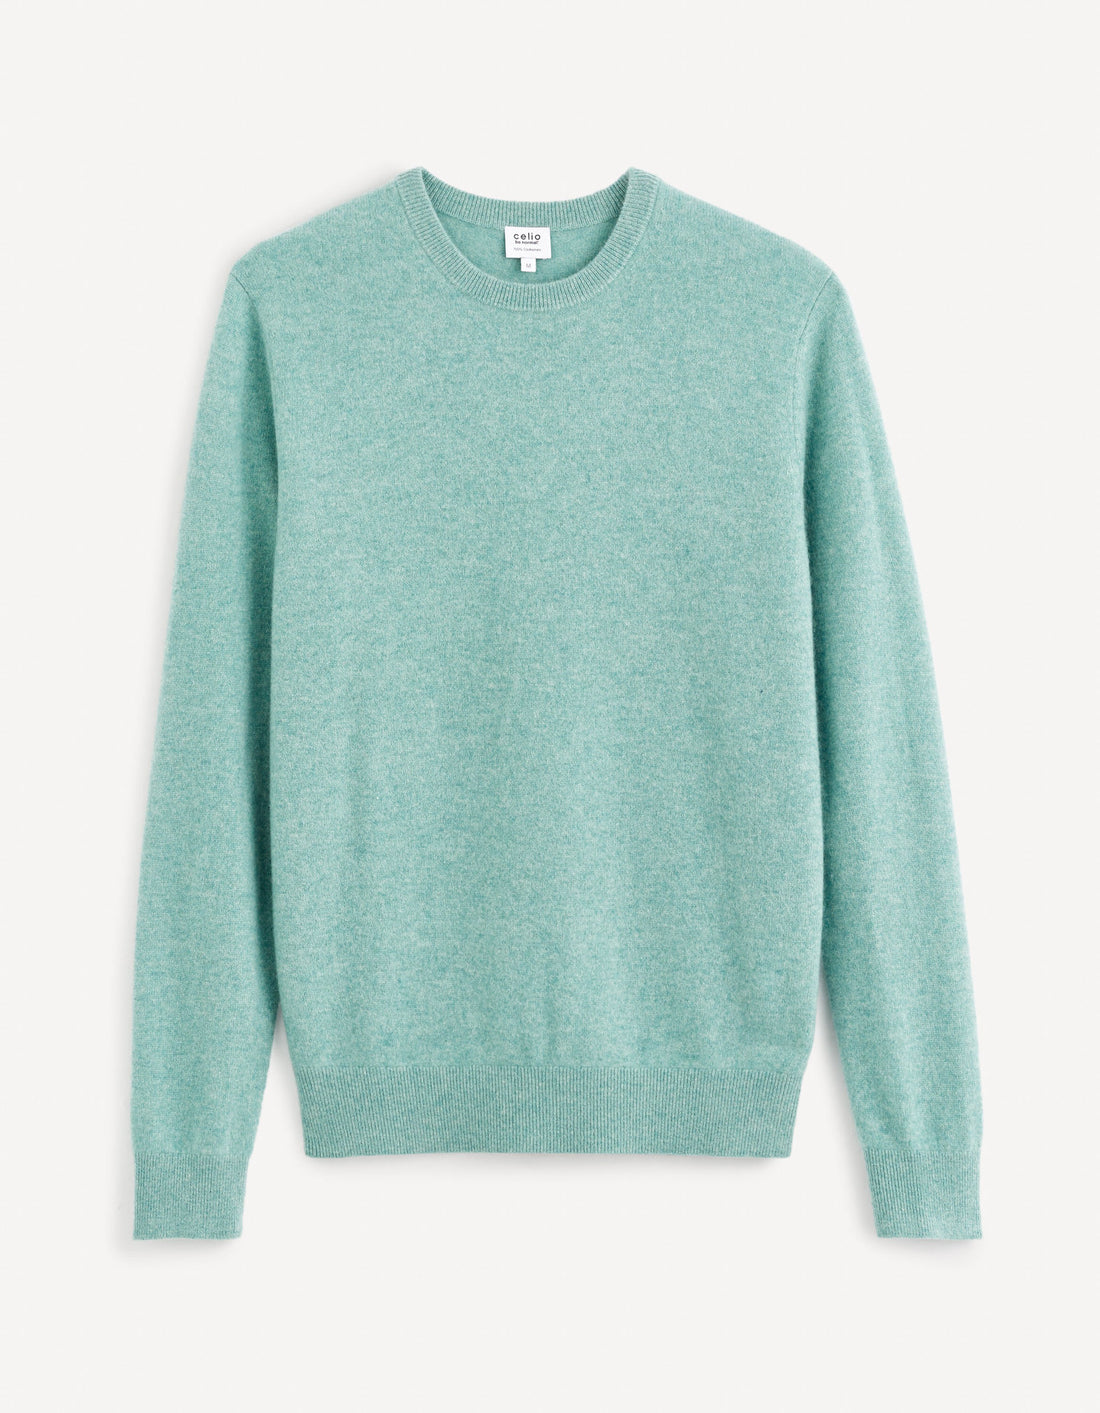 Round Neck Sweater 100% Cashmere_JECLOUD_GREEN MEL_02